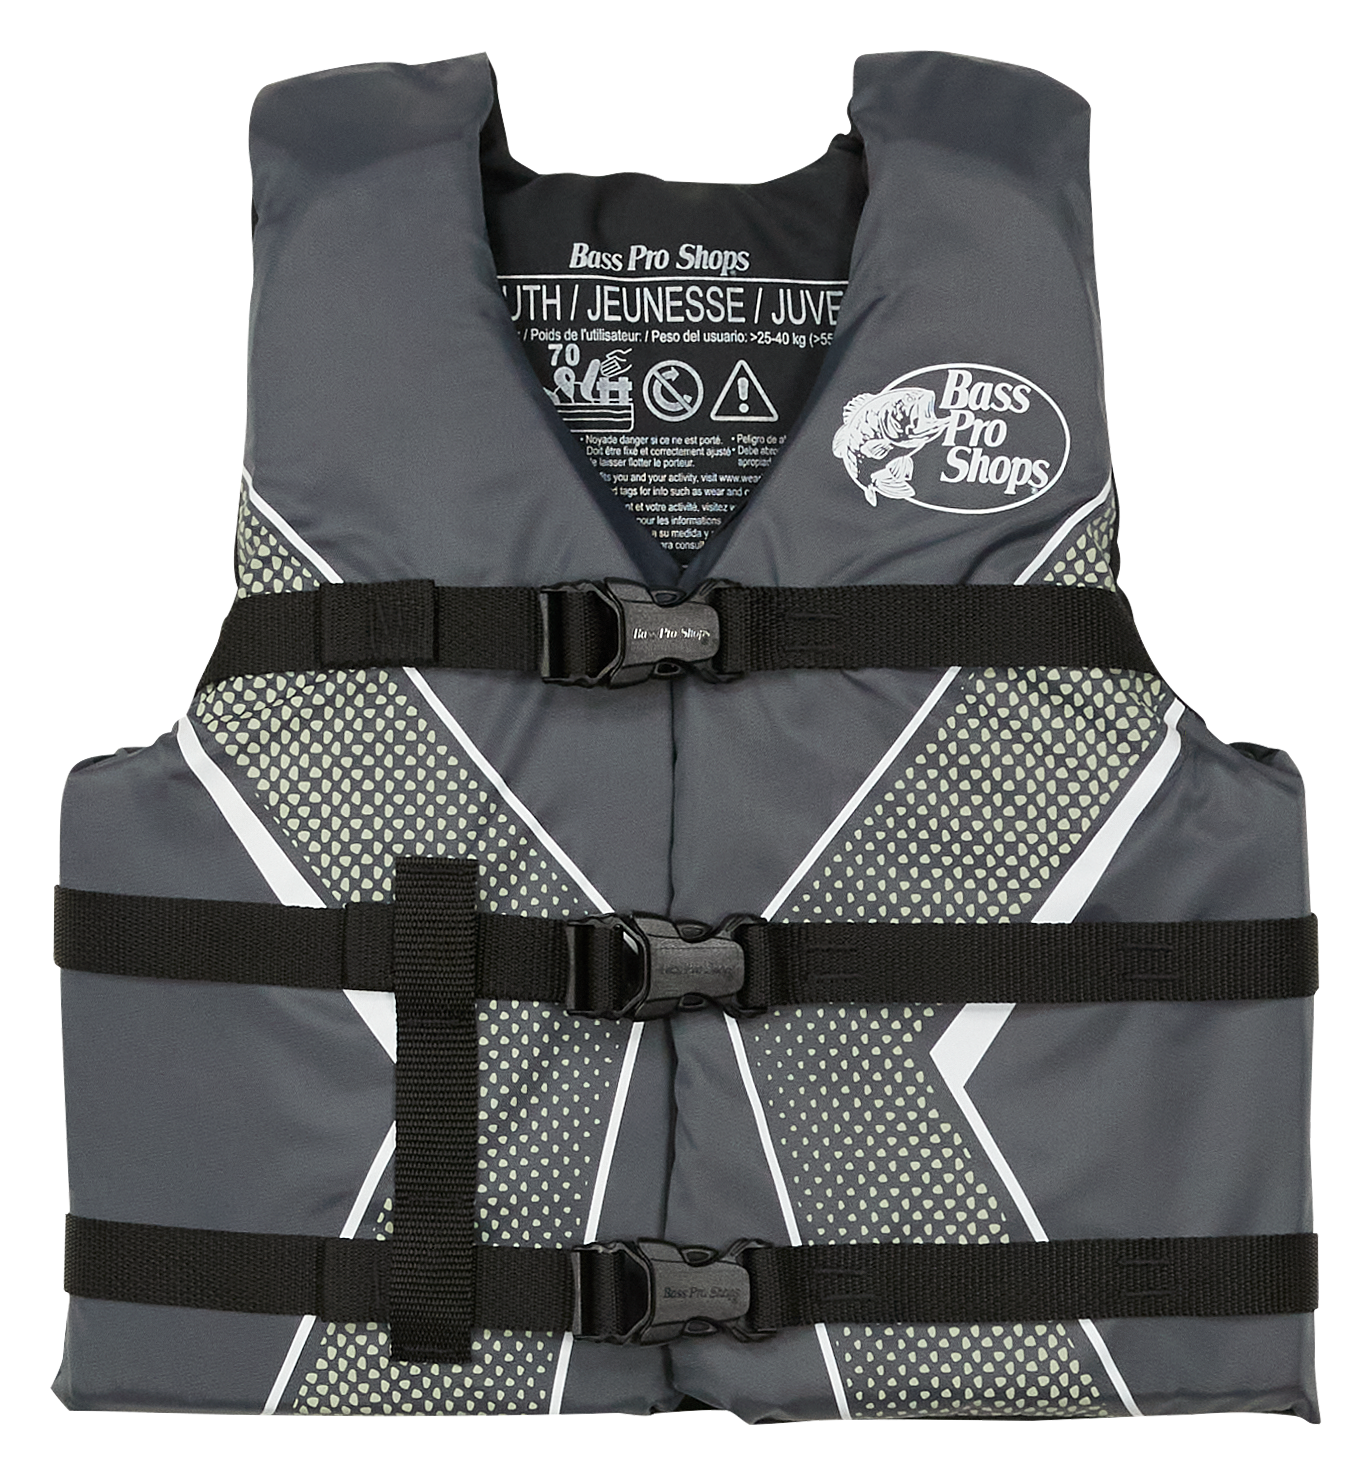 Bass Pro Shops Recreational Life Jacket for Youth - Gray - Youth 55-88 lbs